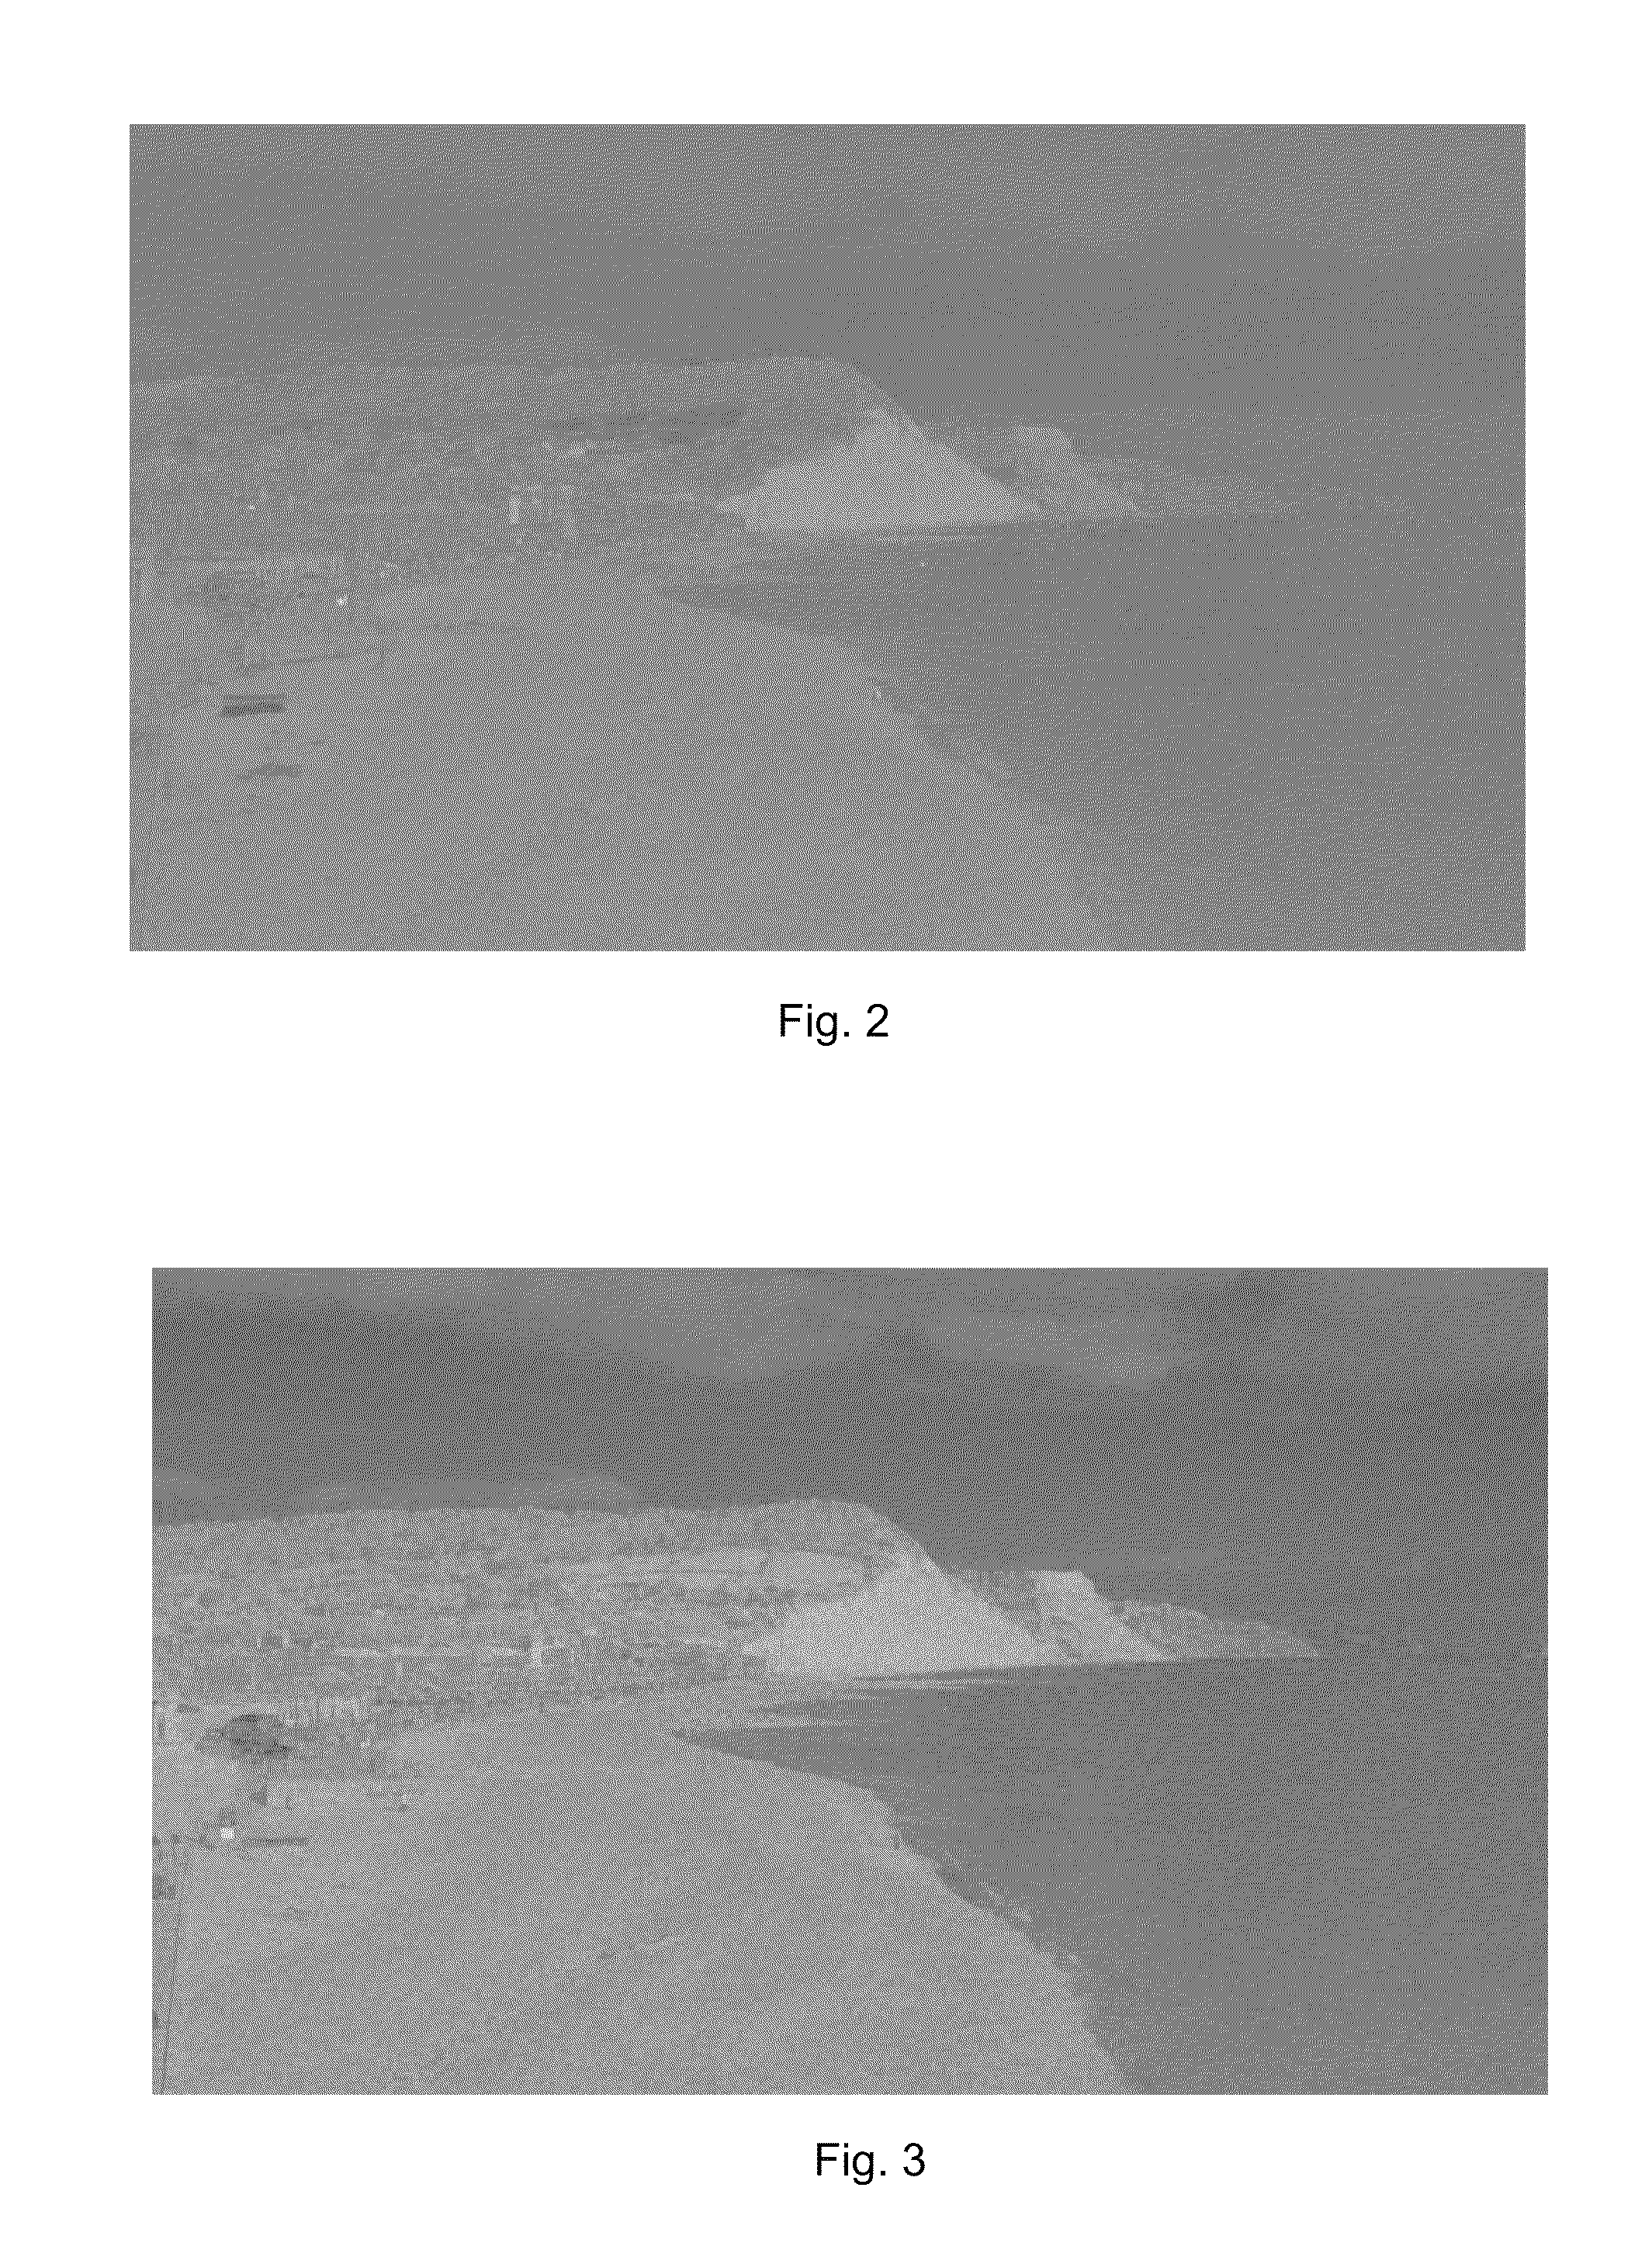 Geometric enumerated watermark embedding for spot colors